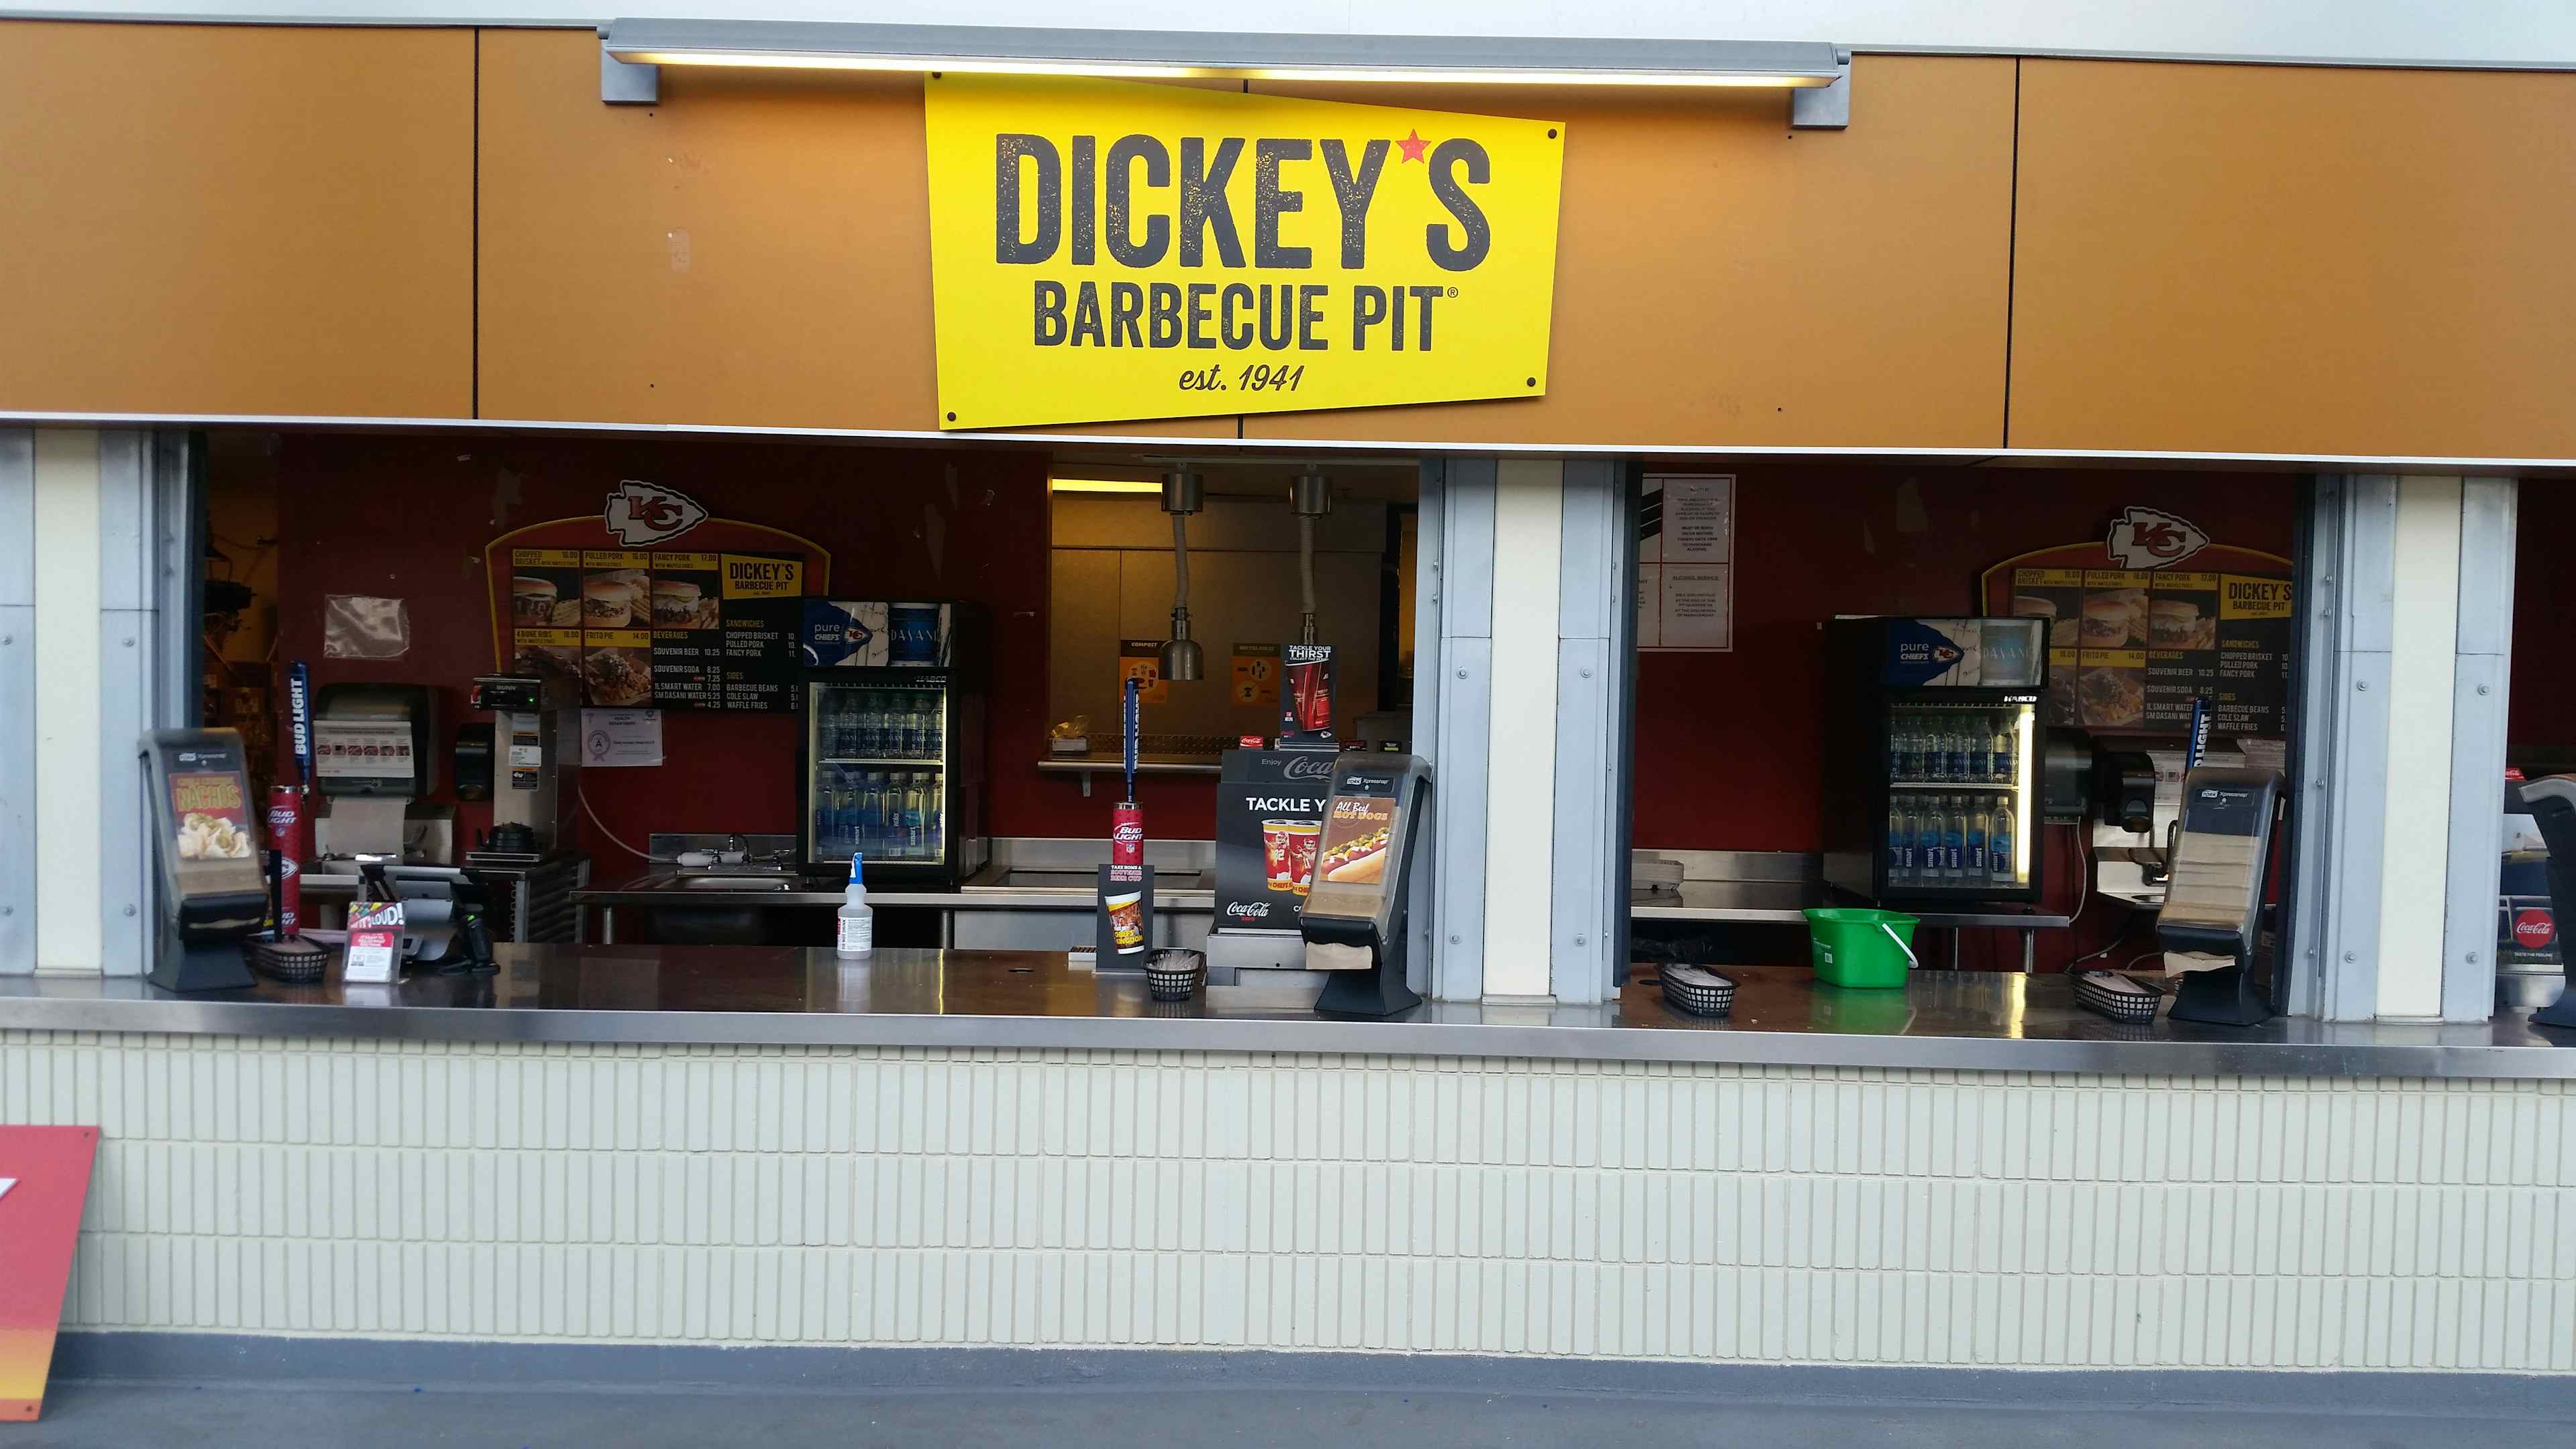 The Daily Meal: Dickey’s Barbecue Pit Scores at Arrowhead Stadium in Kansas City, MO